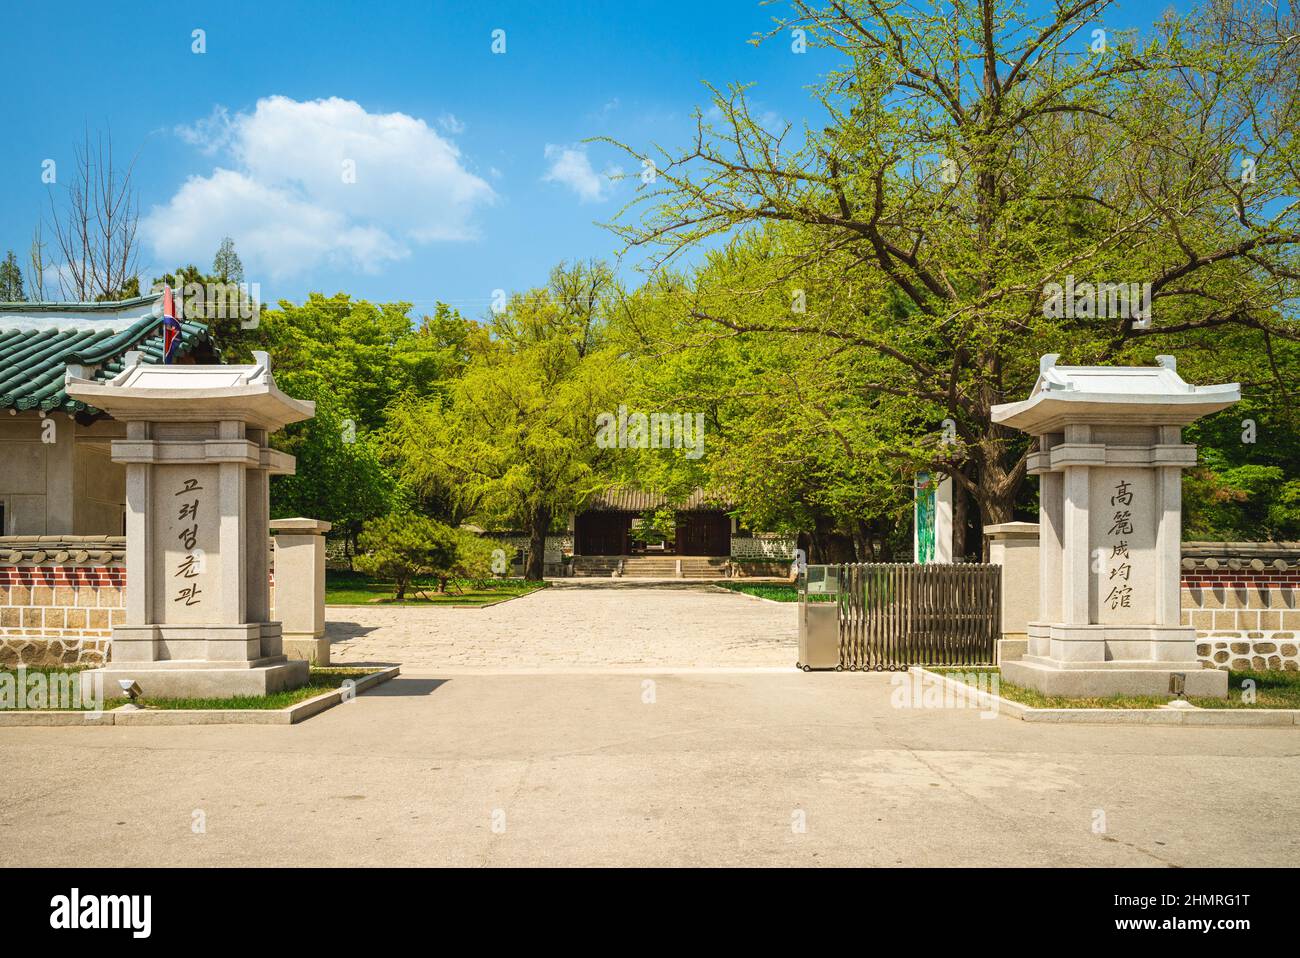 May 1, 2019: Sungkyunkwan Museum, the foremost educational institution in Korea during the late Goryeo and Joseon Dynasties, is a Korea UNESCO World H Stock Photo